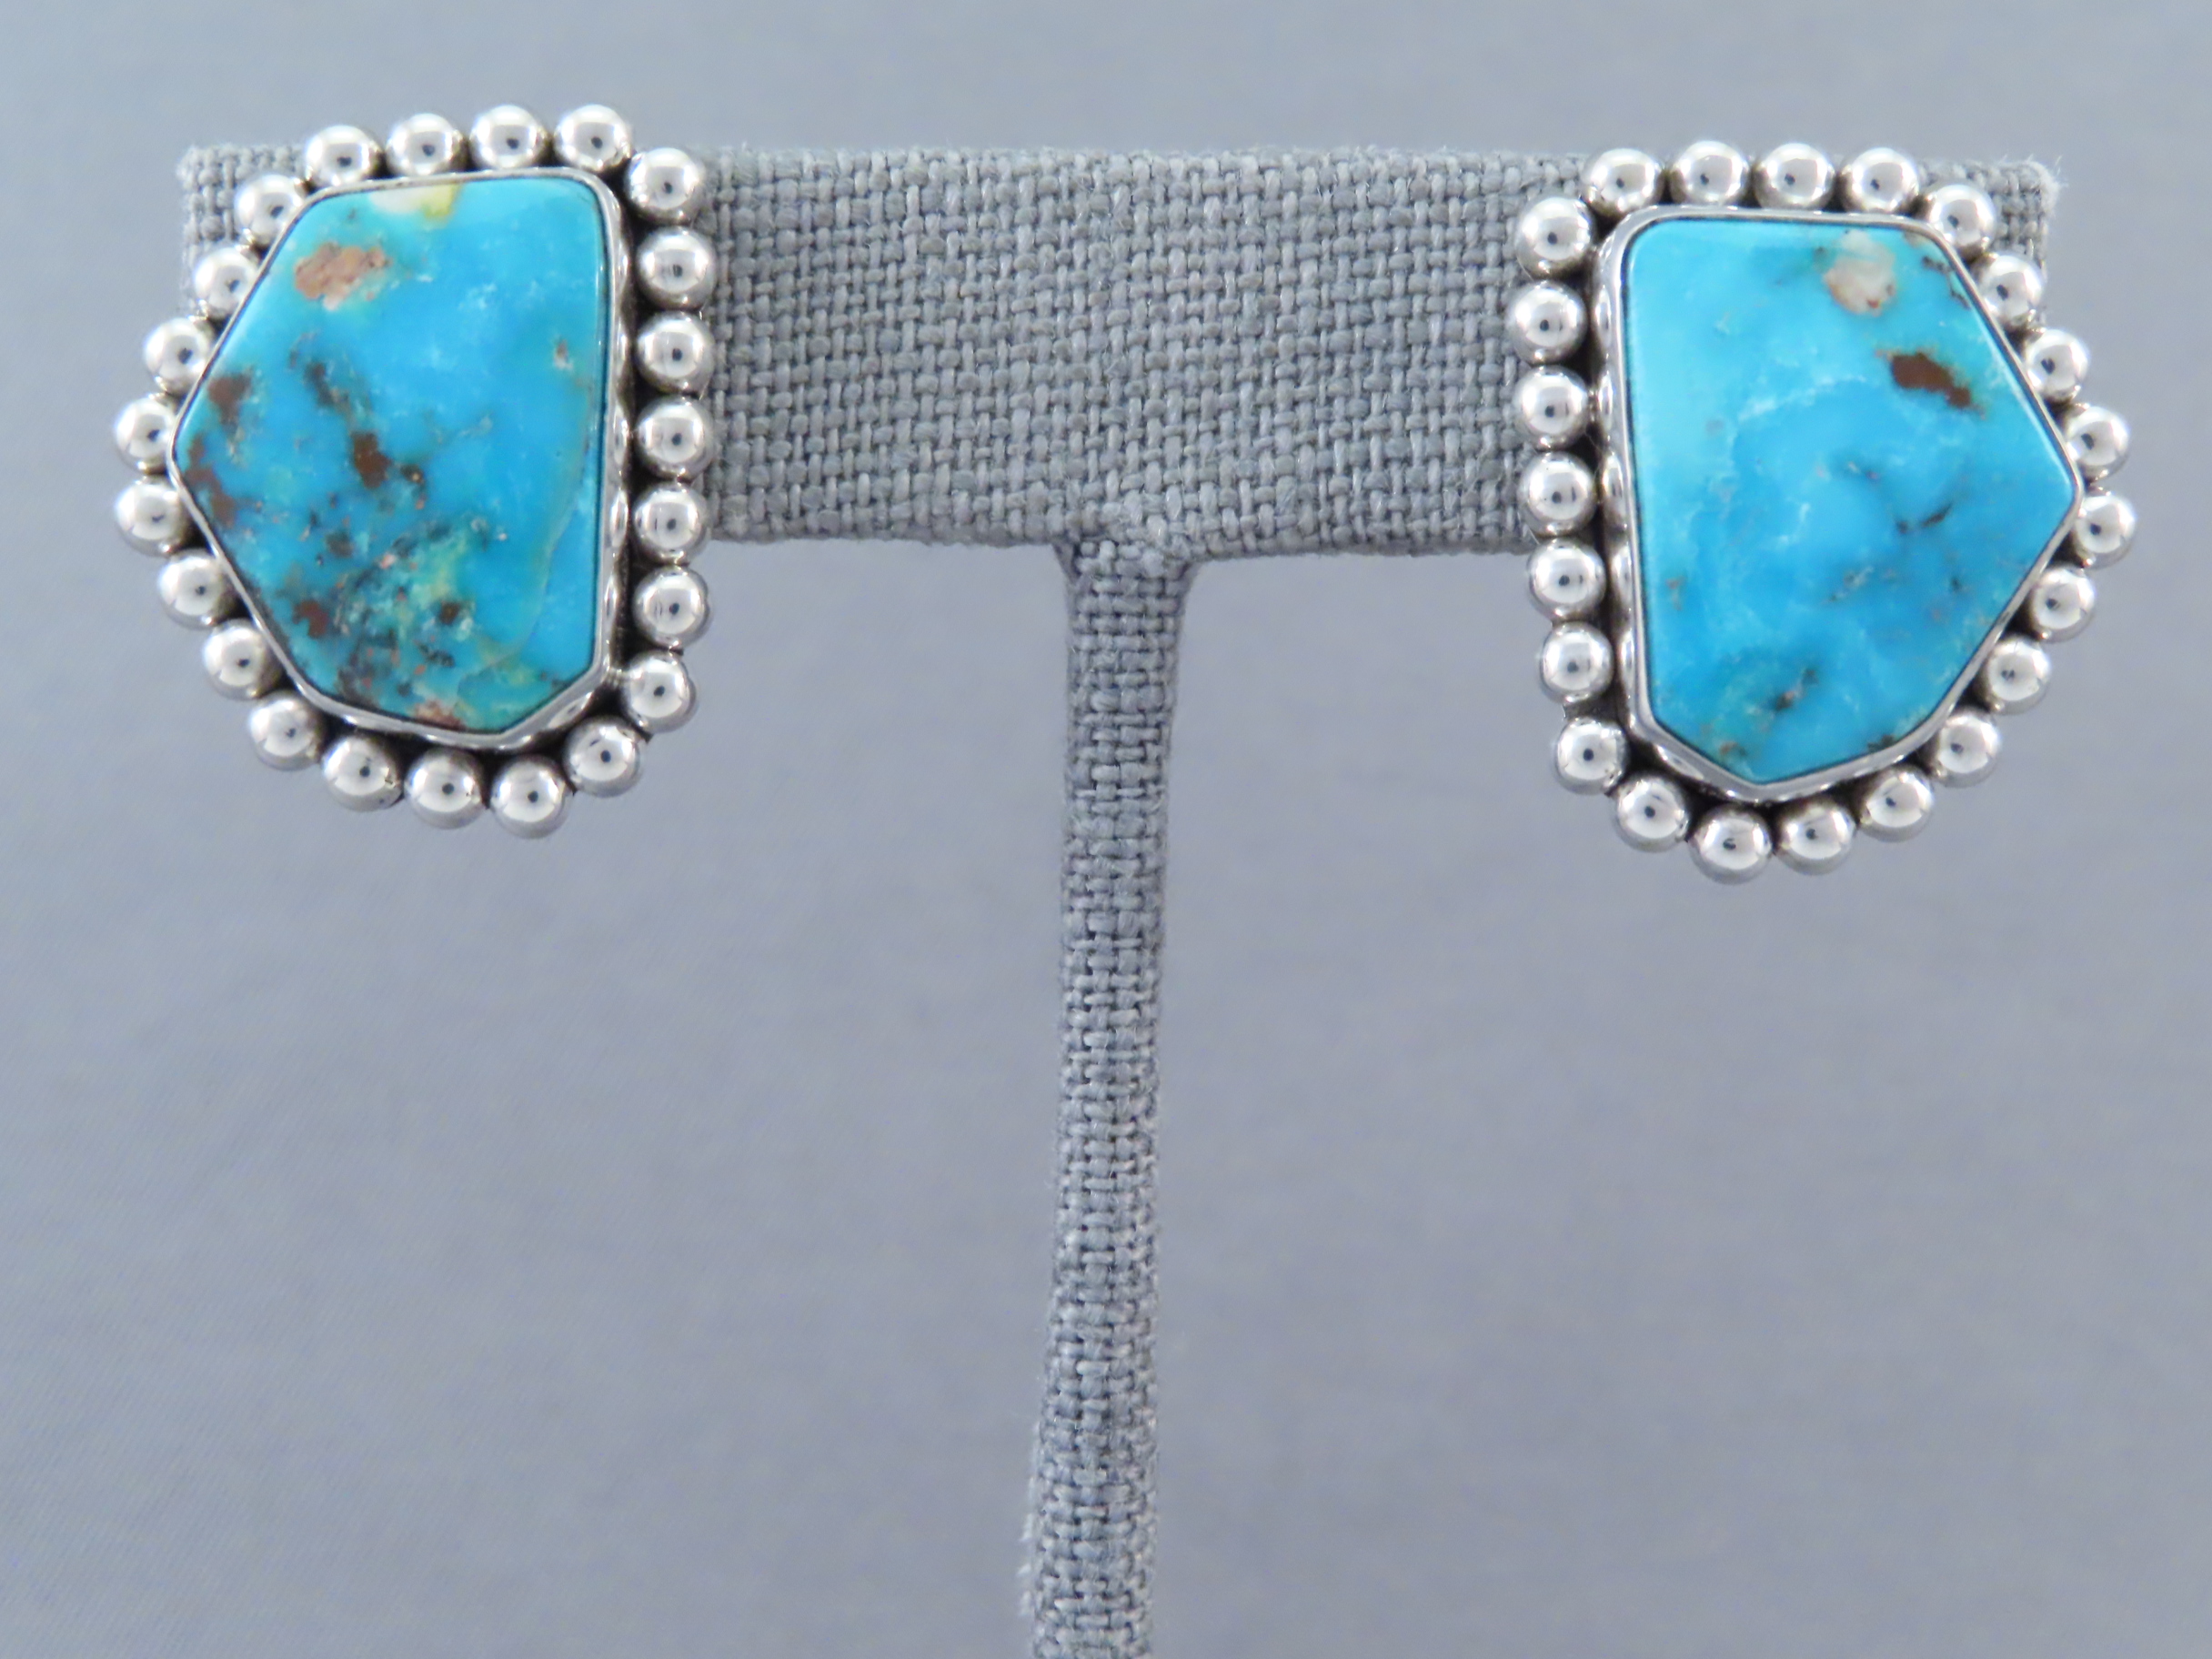 Artie Yellowhorse Earrings with Fox Turquoise